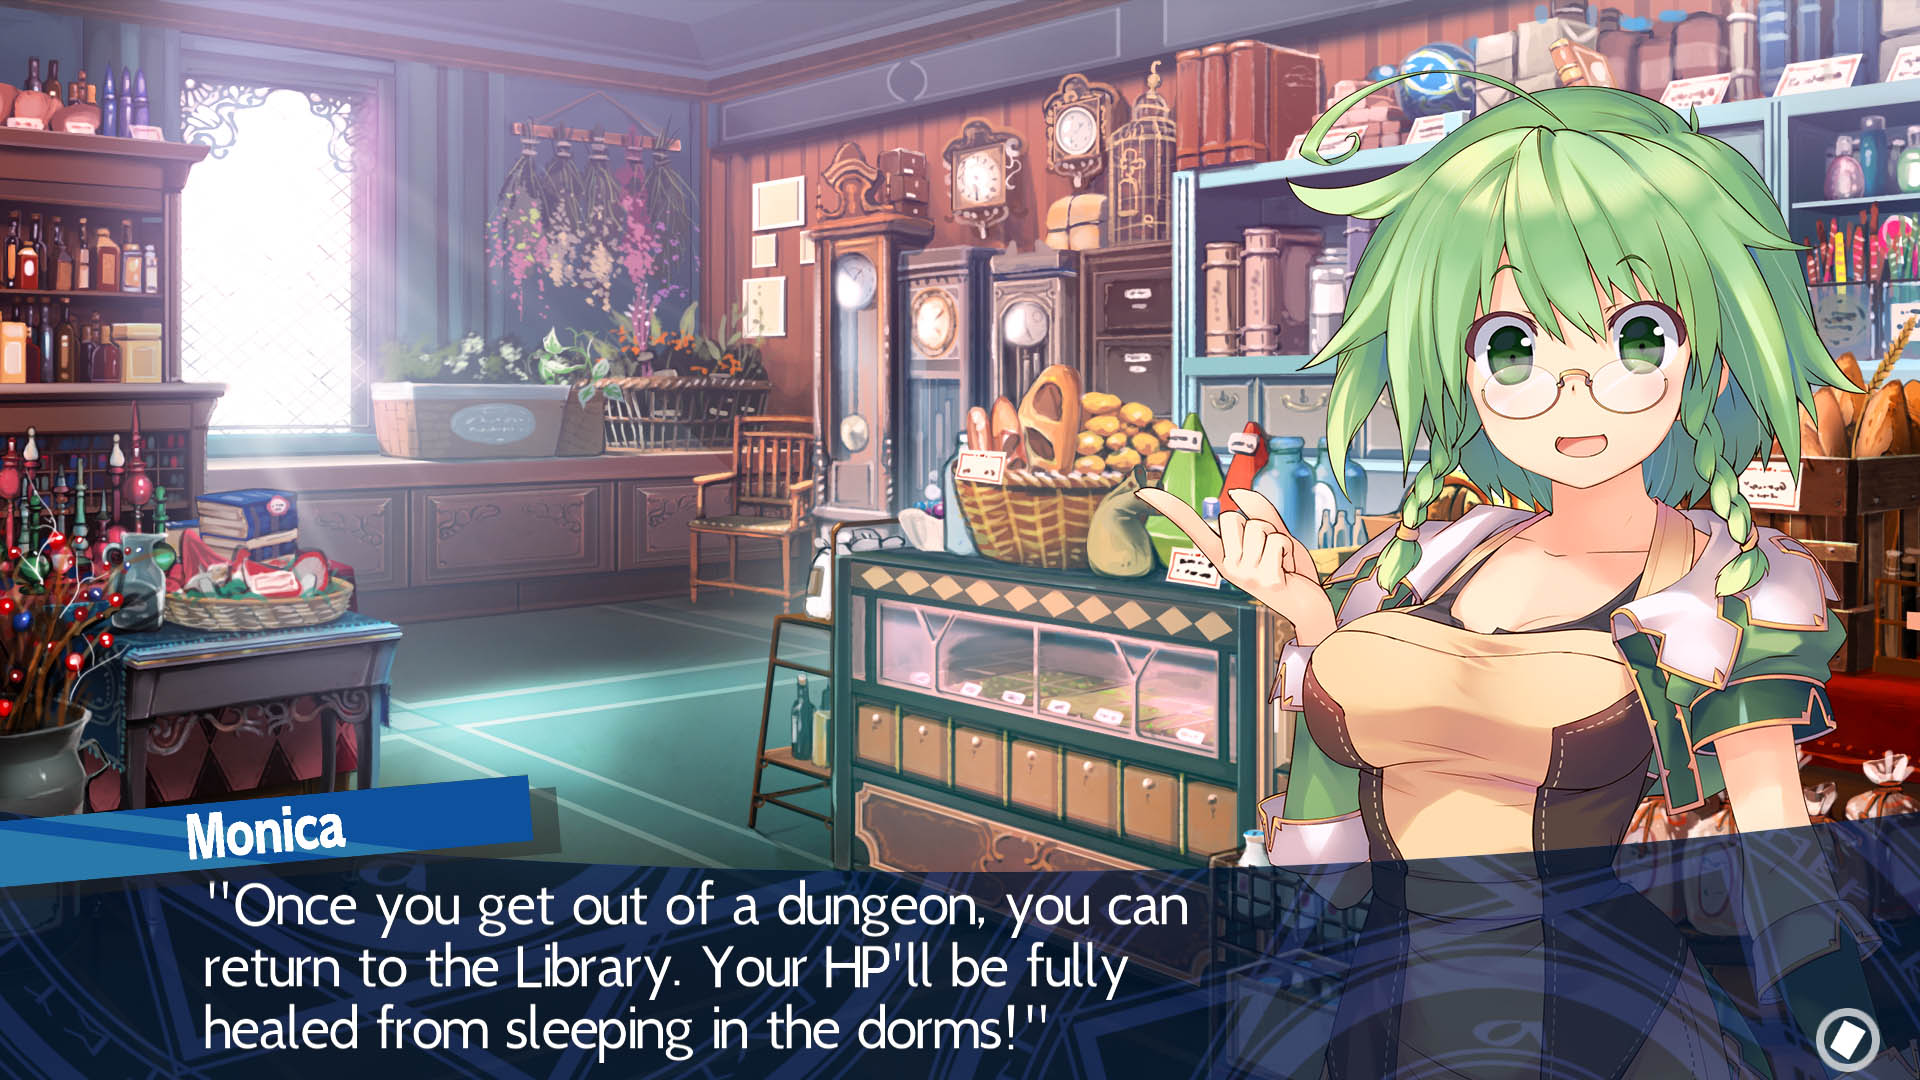 Dungeon Travelers 2: The Royal Library & the Monster Seal (English) - RPG - 2 - Select